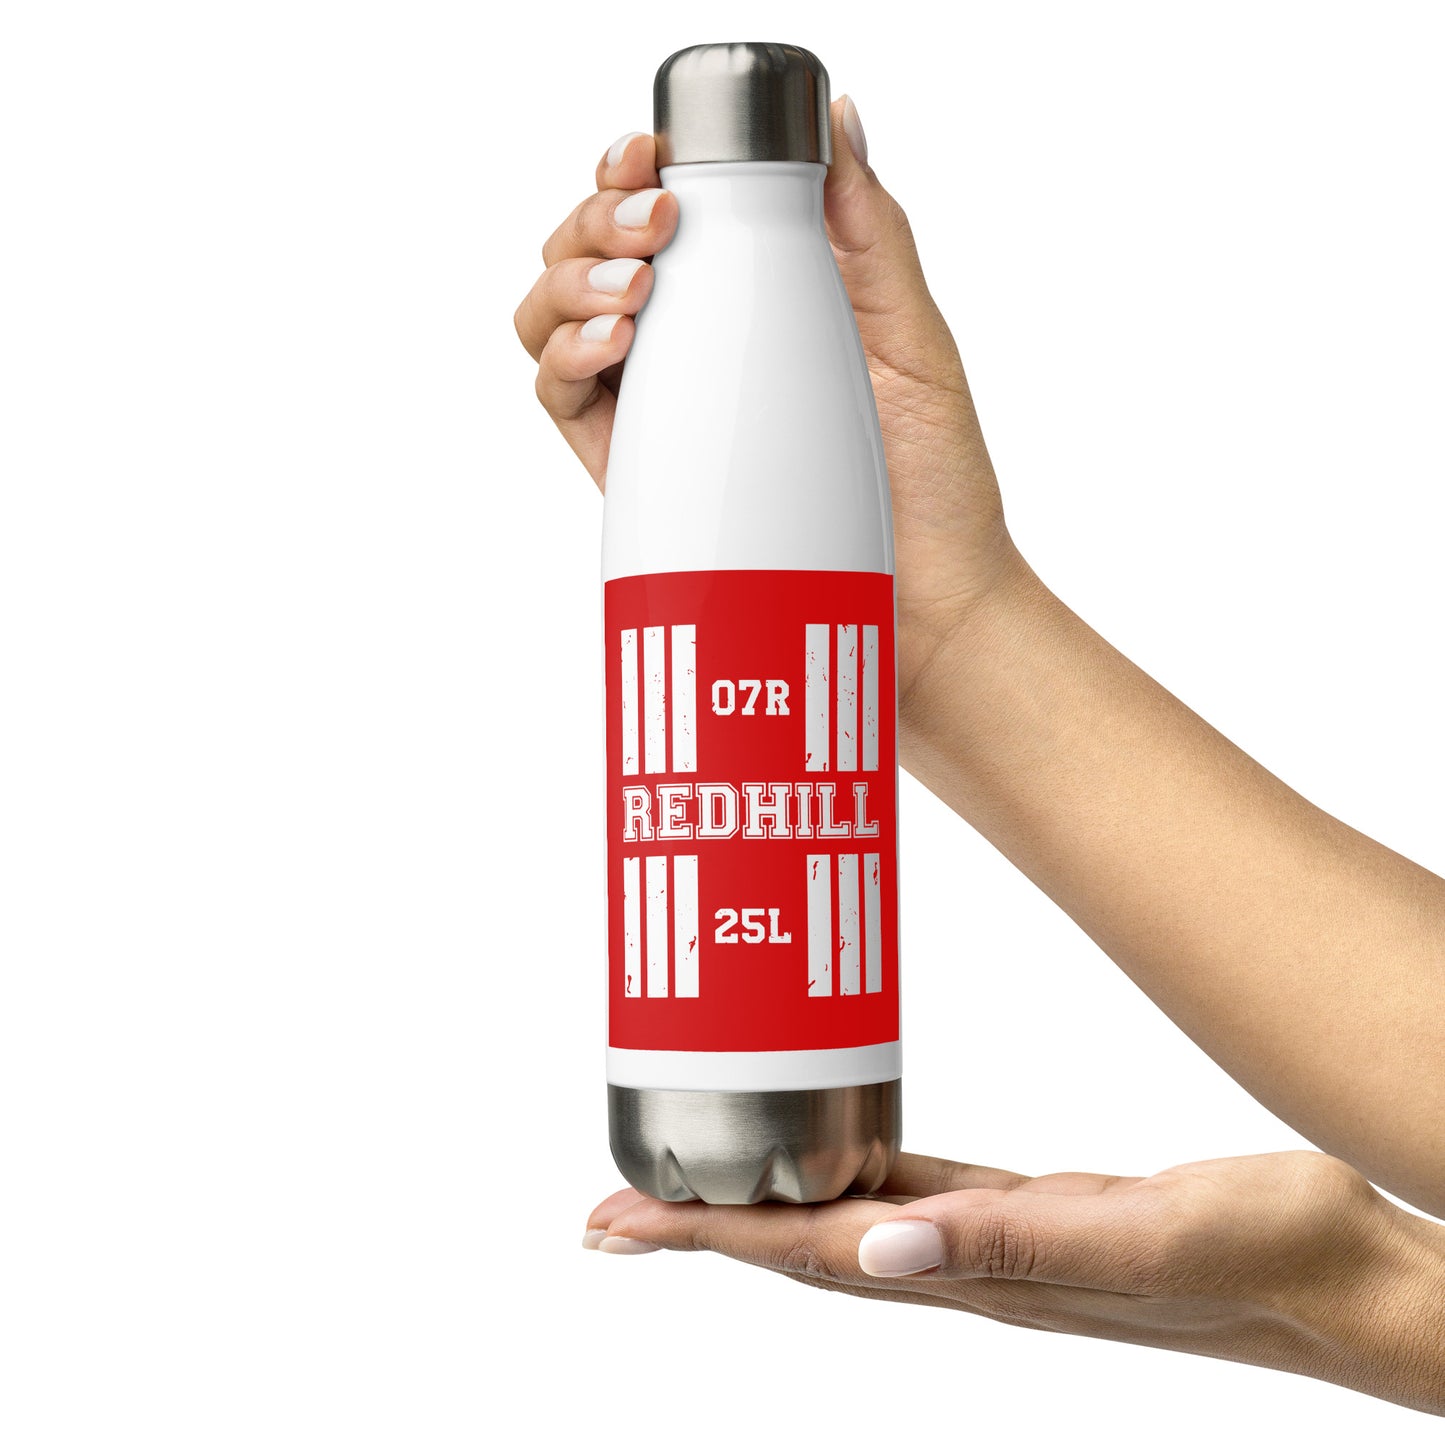 The Redhill Aerodrome runway designator water bottle features a red print with the airport's name and designator framed by stylised threshold markings showing through.